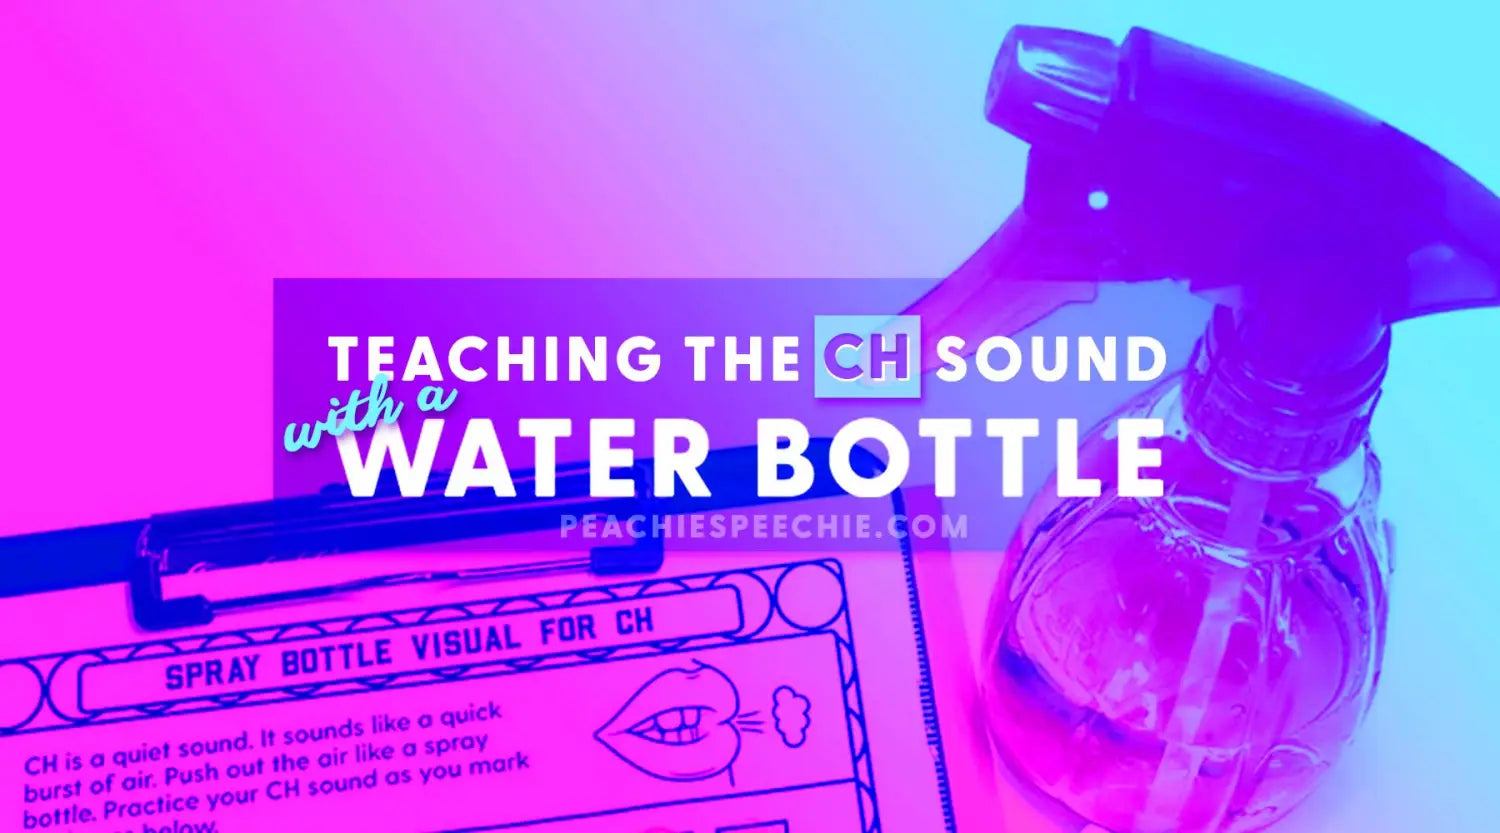 Teaching the CH Sound With a Water Bottle